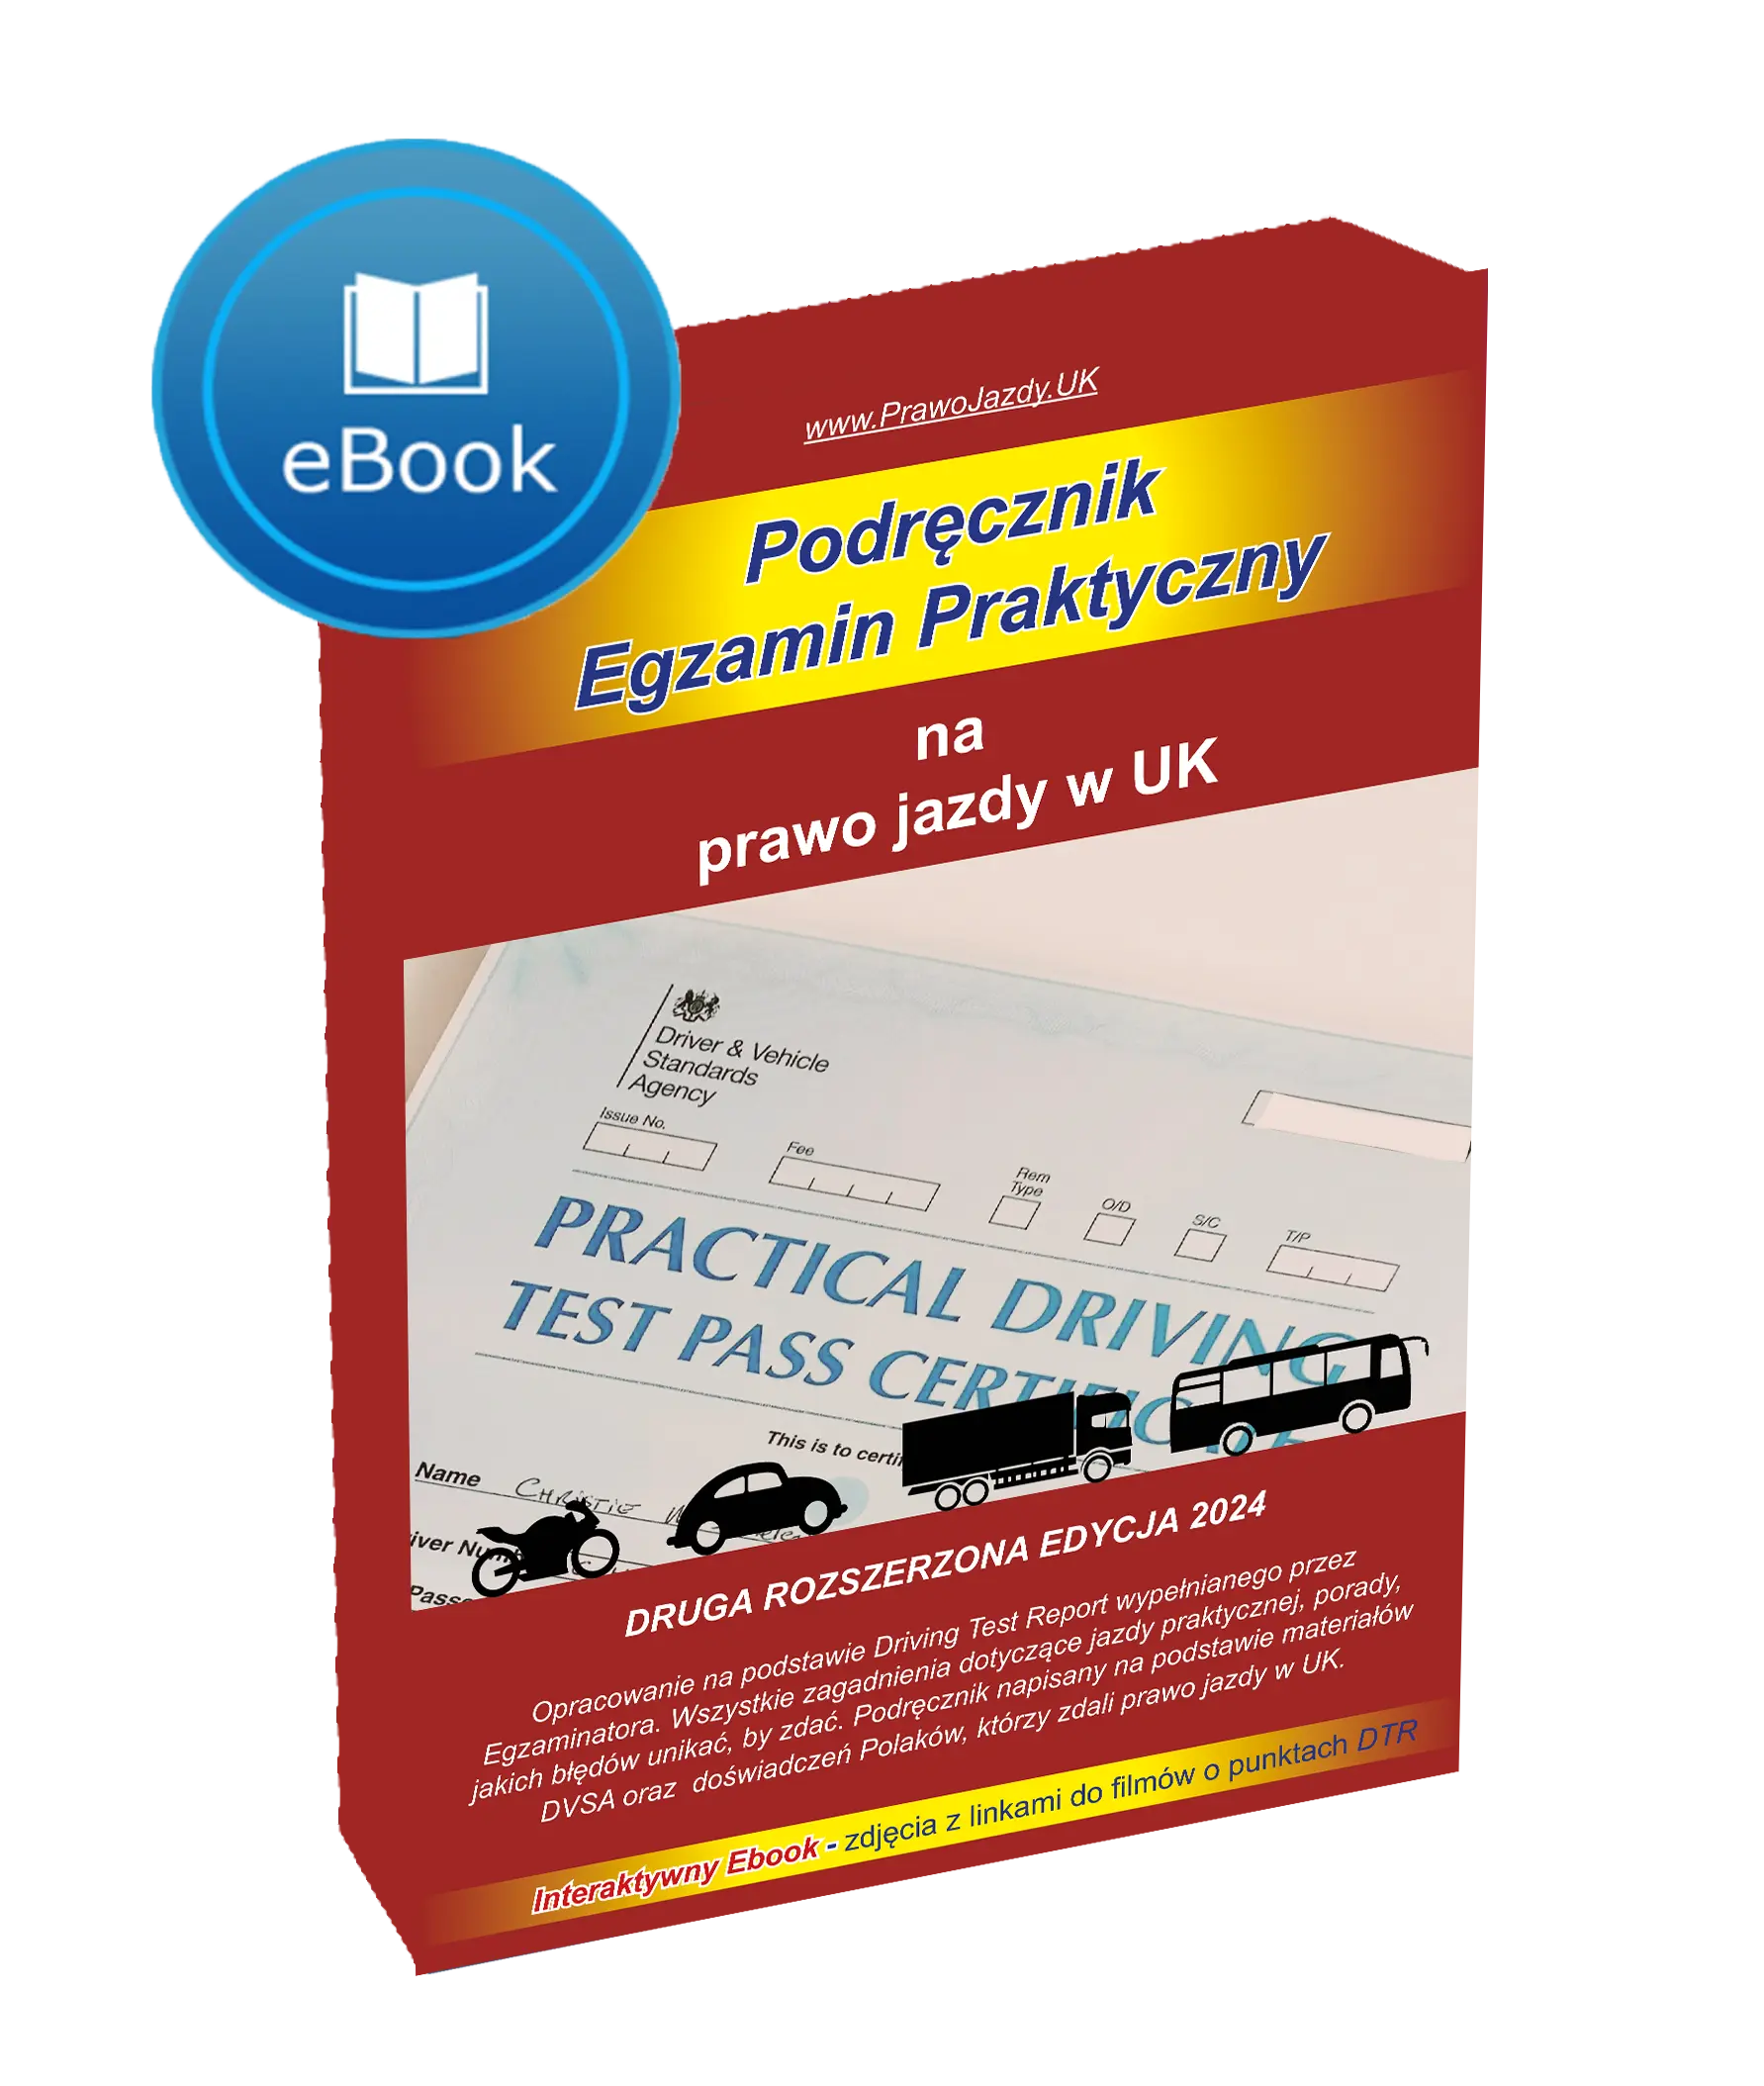 How to pass Practical driving test first time exam in Polish